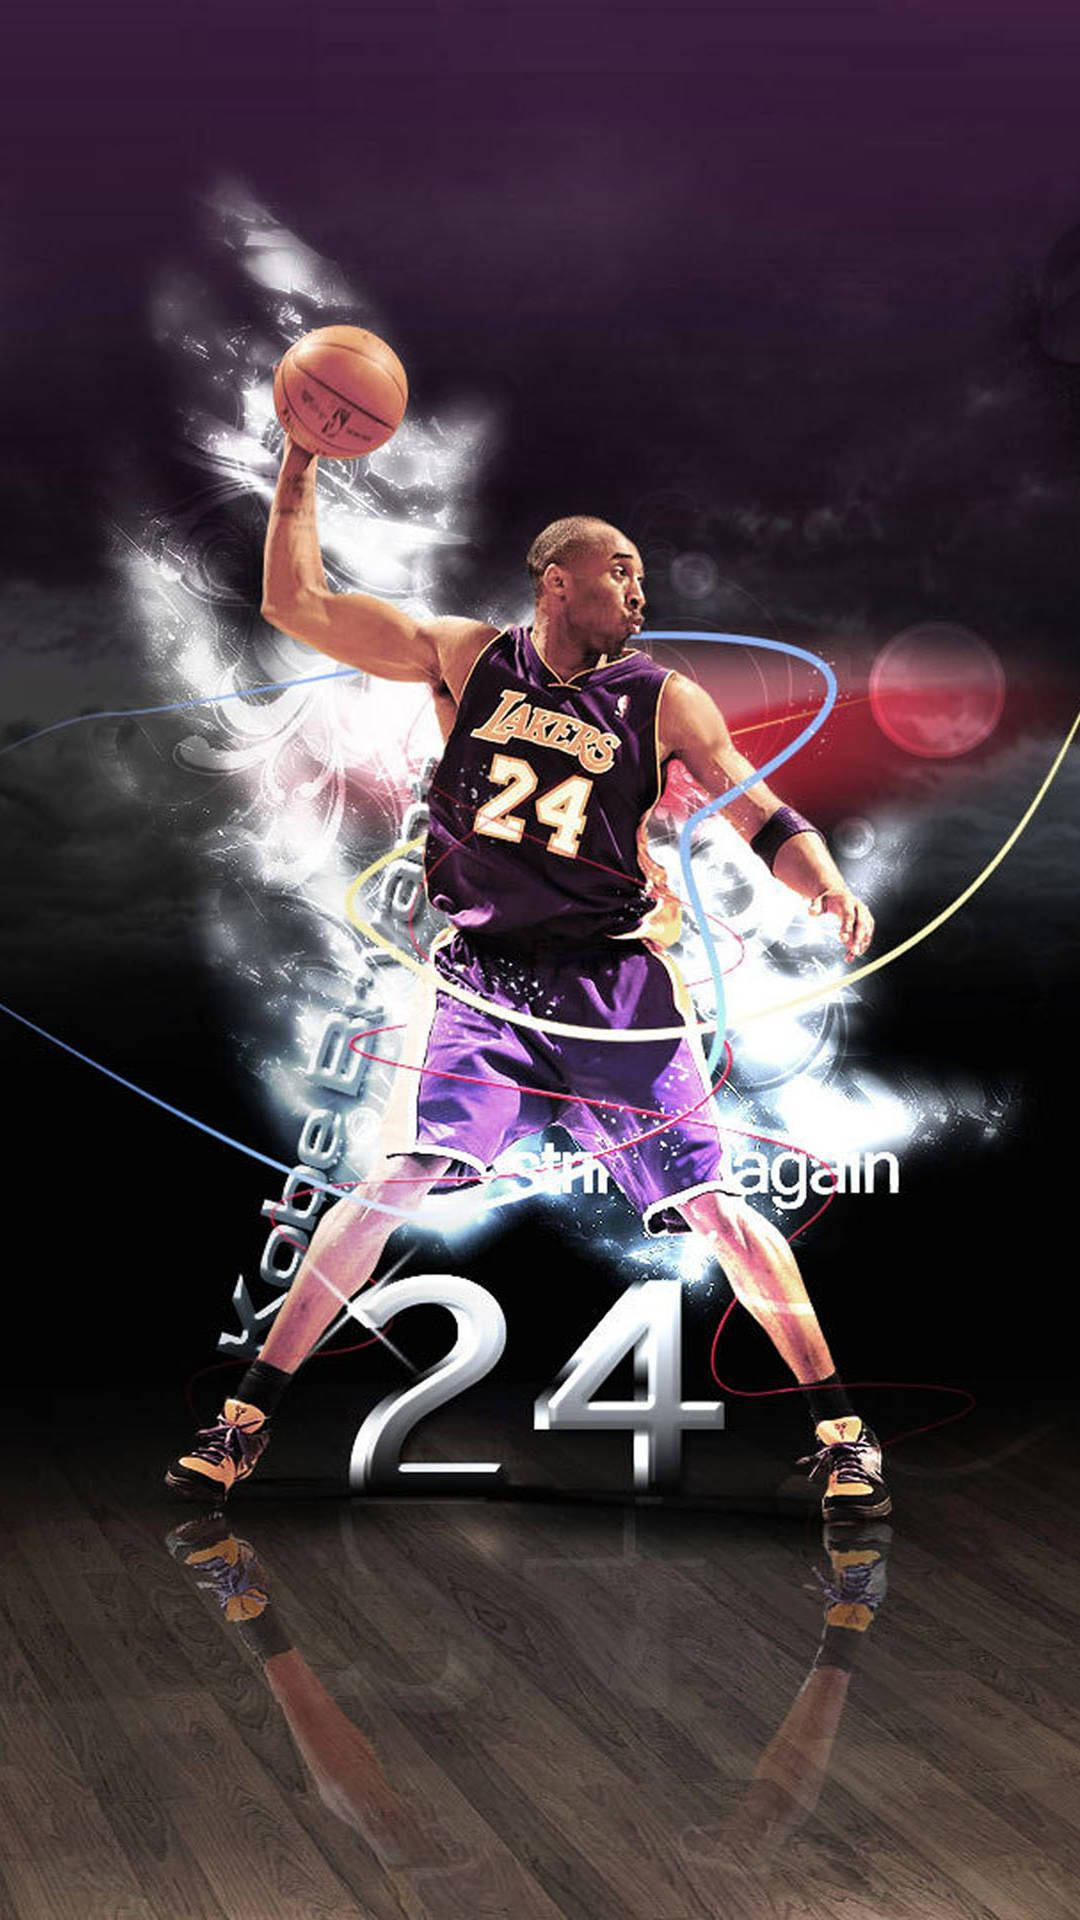 A proud moment for Kobe Bryant - Celebrating the release of the Kobe Bryant iPhone Wallpaper